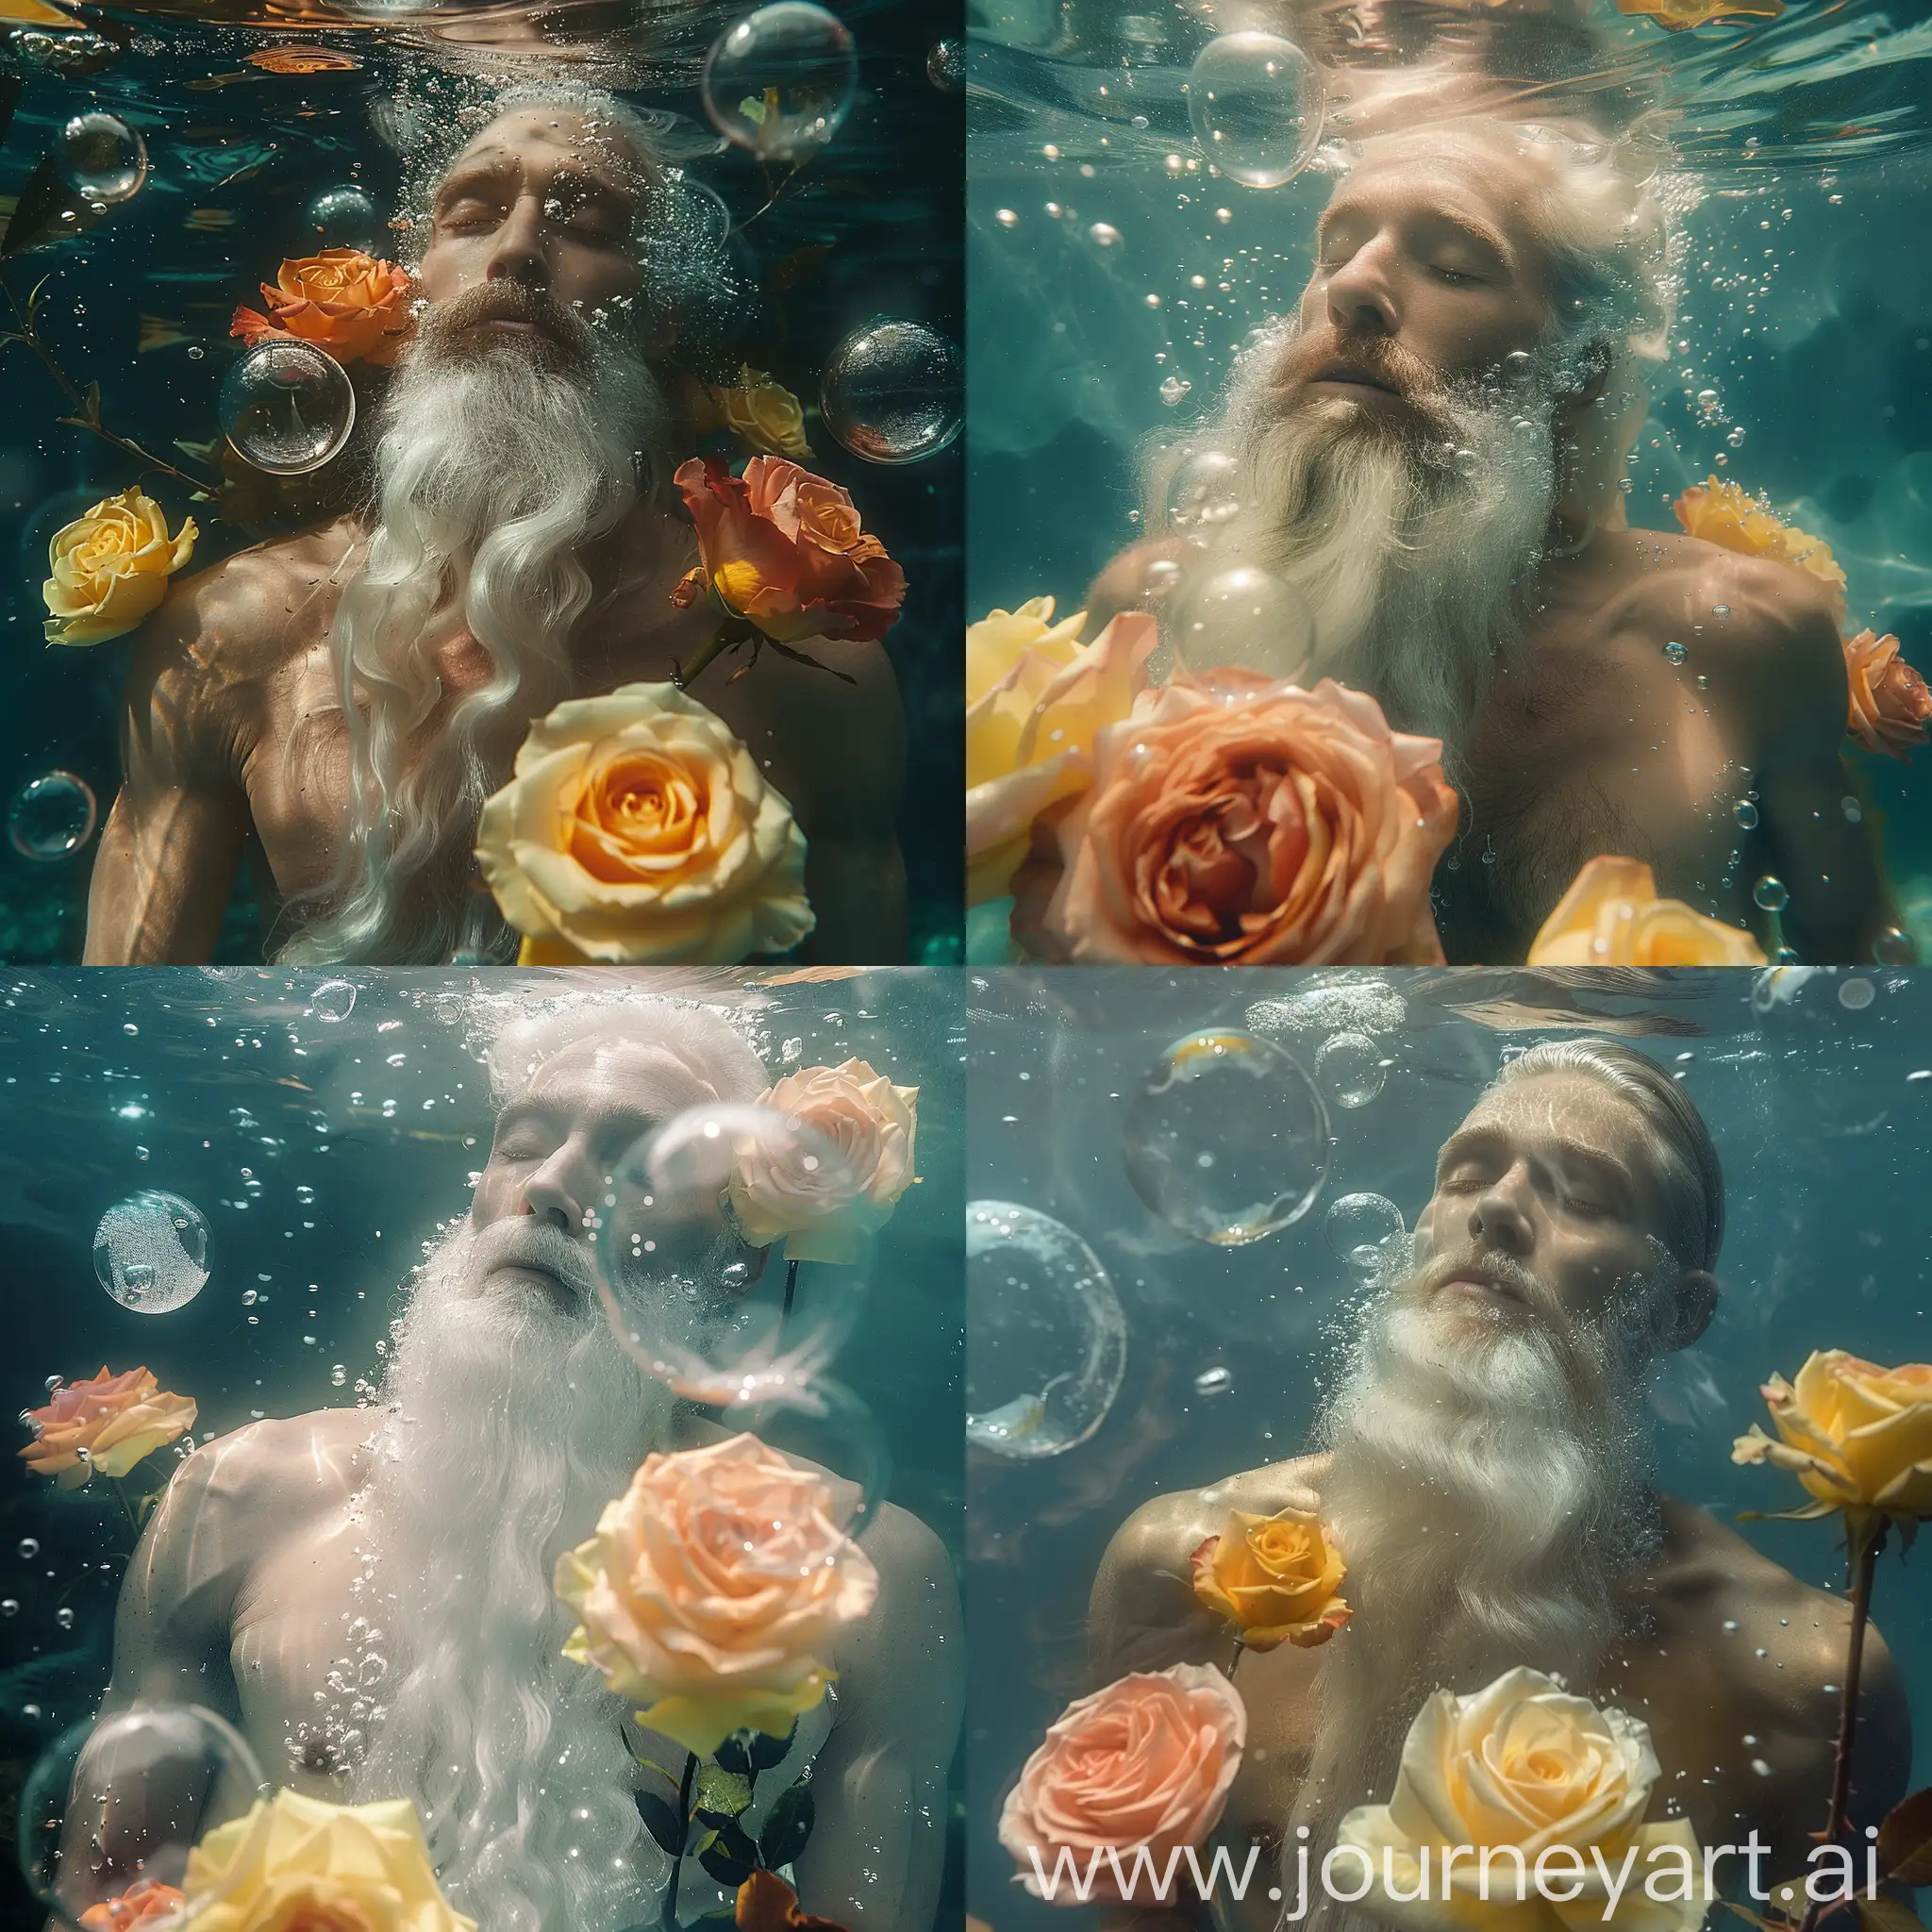 Serene-Underwater-Meditation-with-Shirtless-Man-and-Citrus-Roses